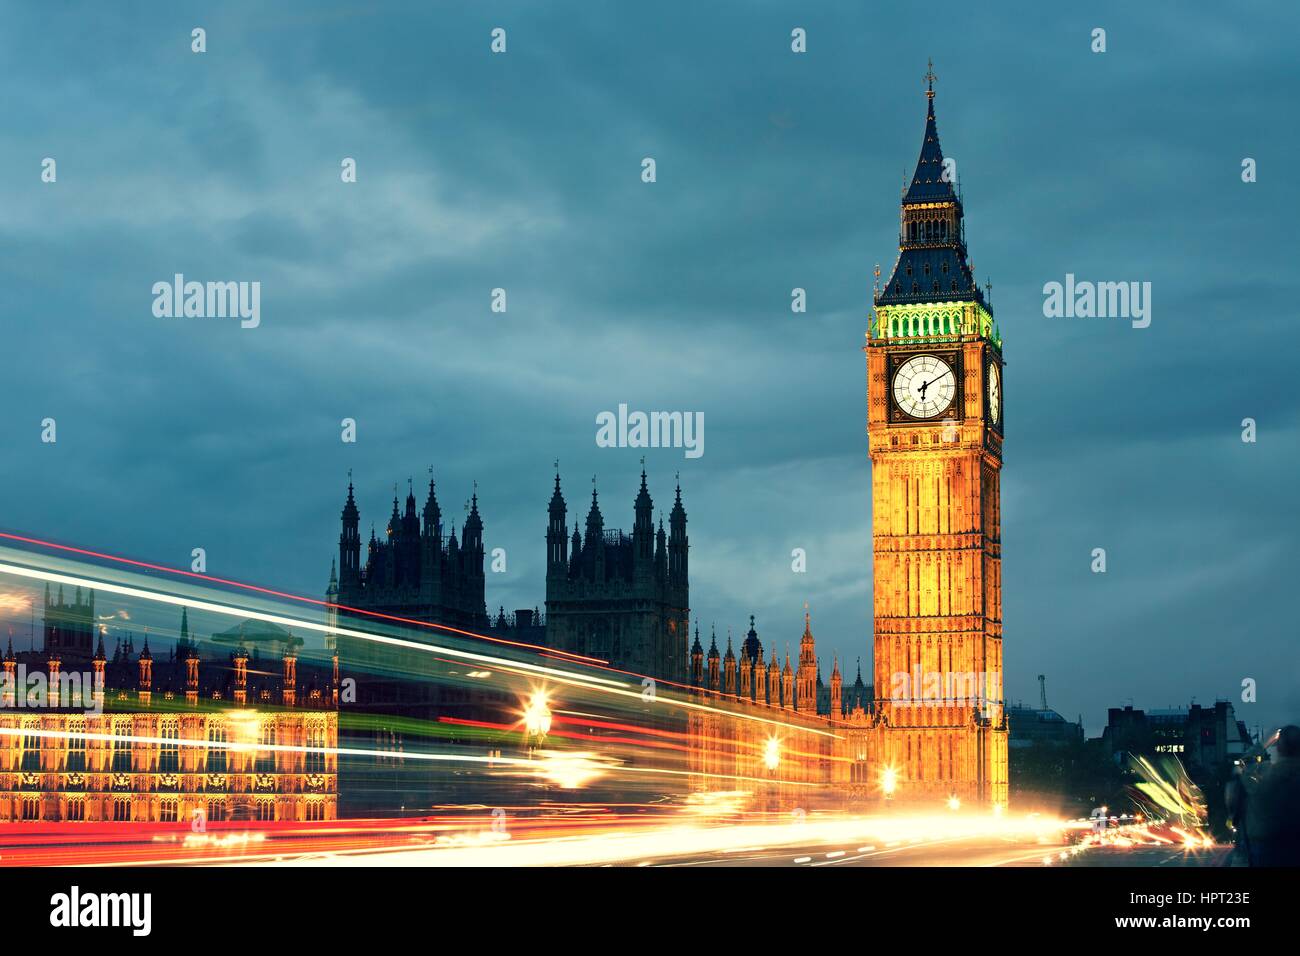 Big Ben and the Houses of Parliament, London, UK Stock Photo